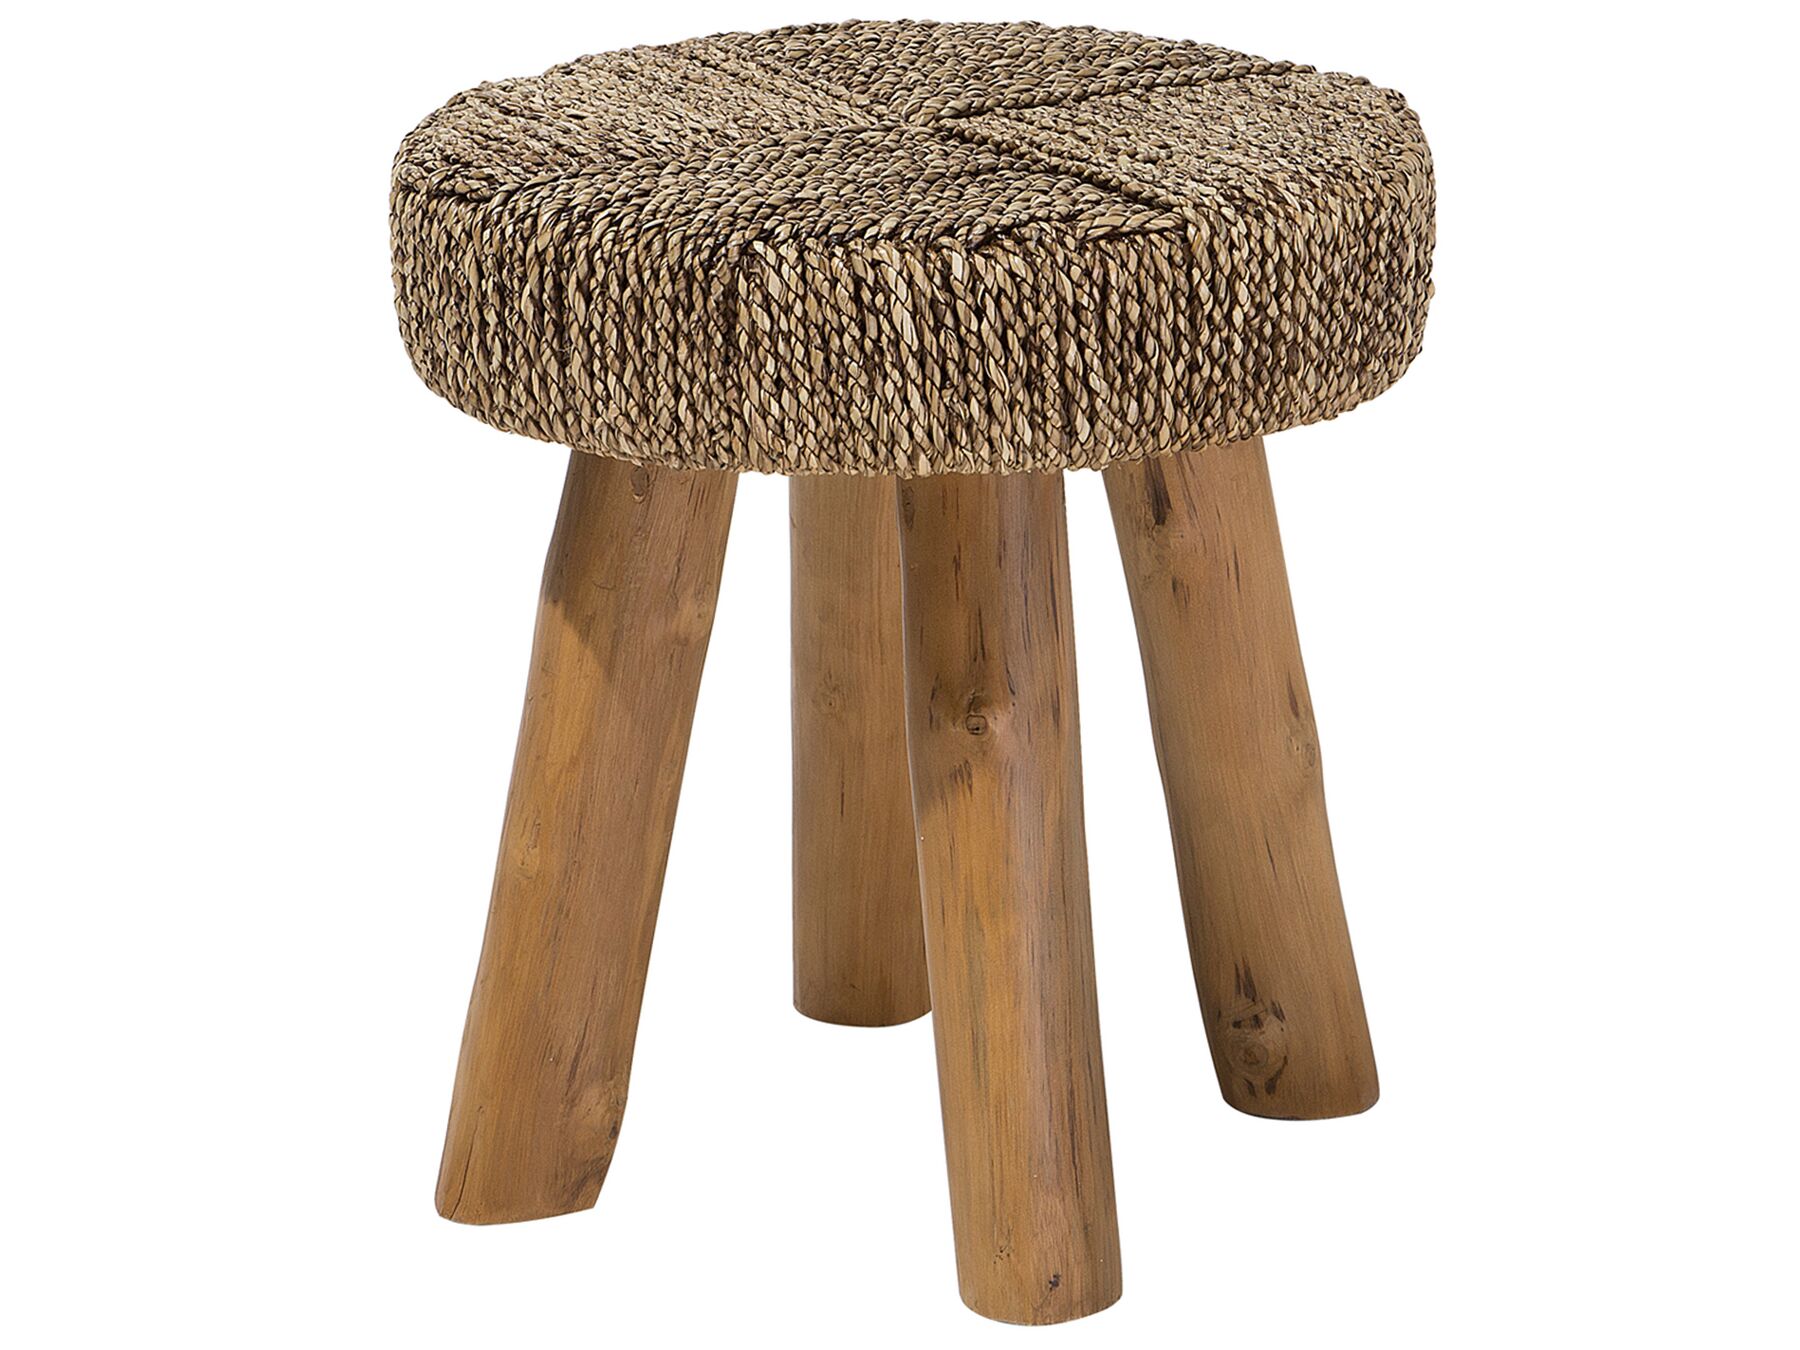 Accent Teak Wood End Table Natural Design Seagrass Top Kelsey